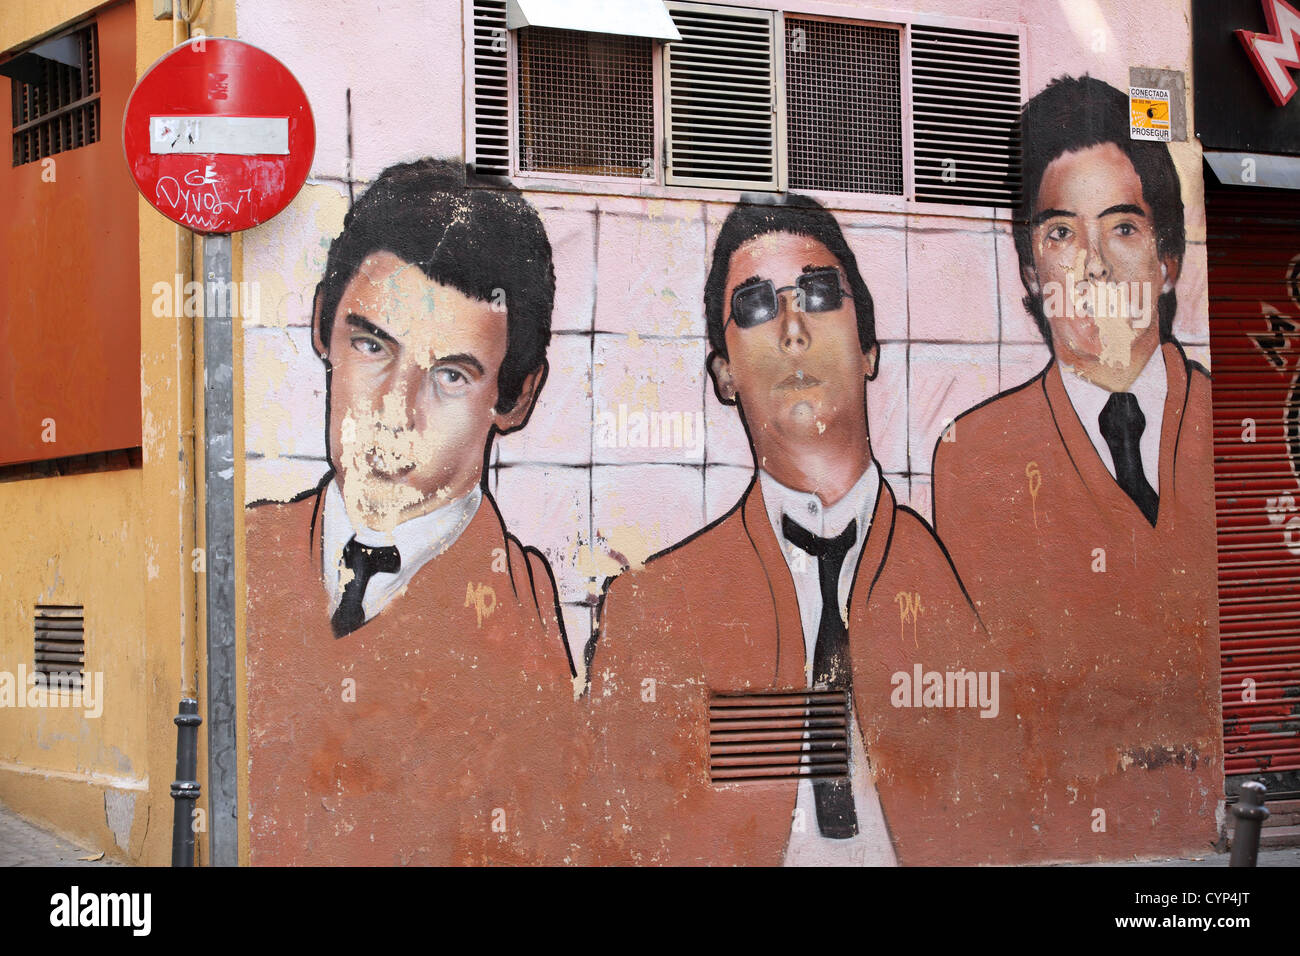 Old mural, depicting the members of The Jam, 1970's mod band, Paul Weller, central Madrid, Spain Stock Photo